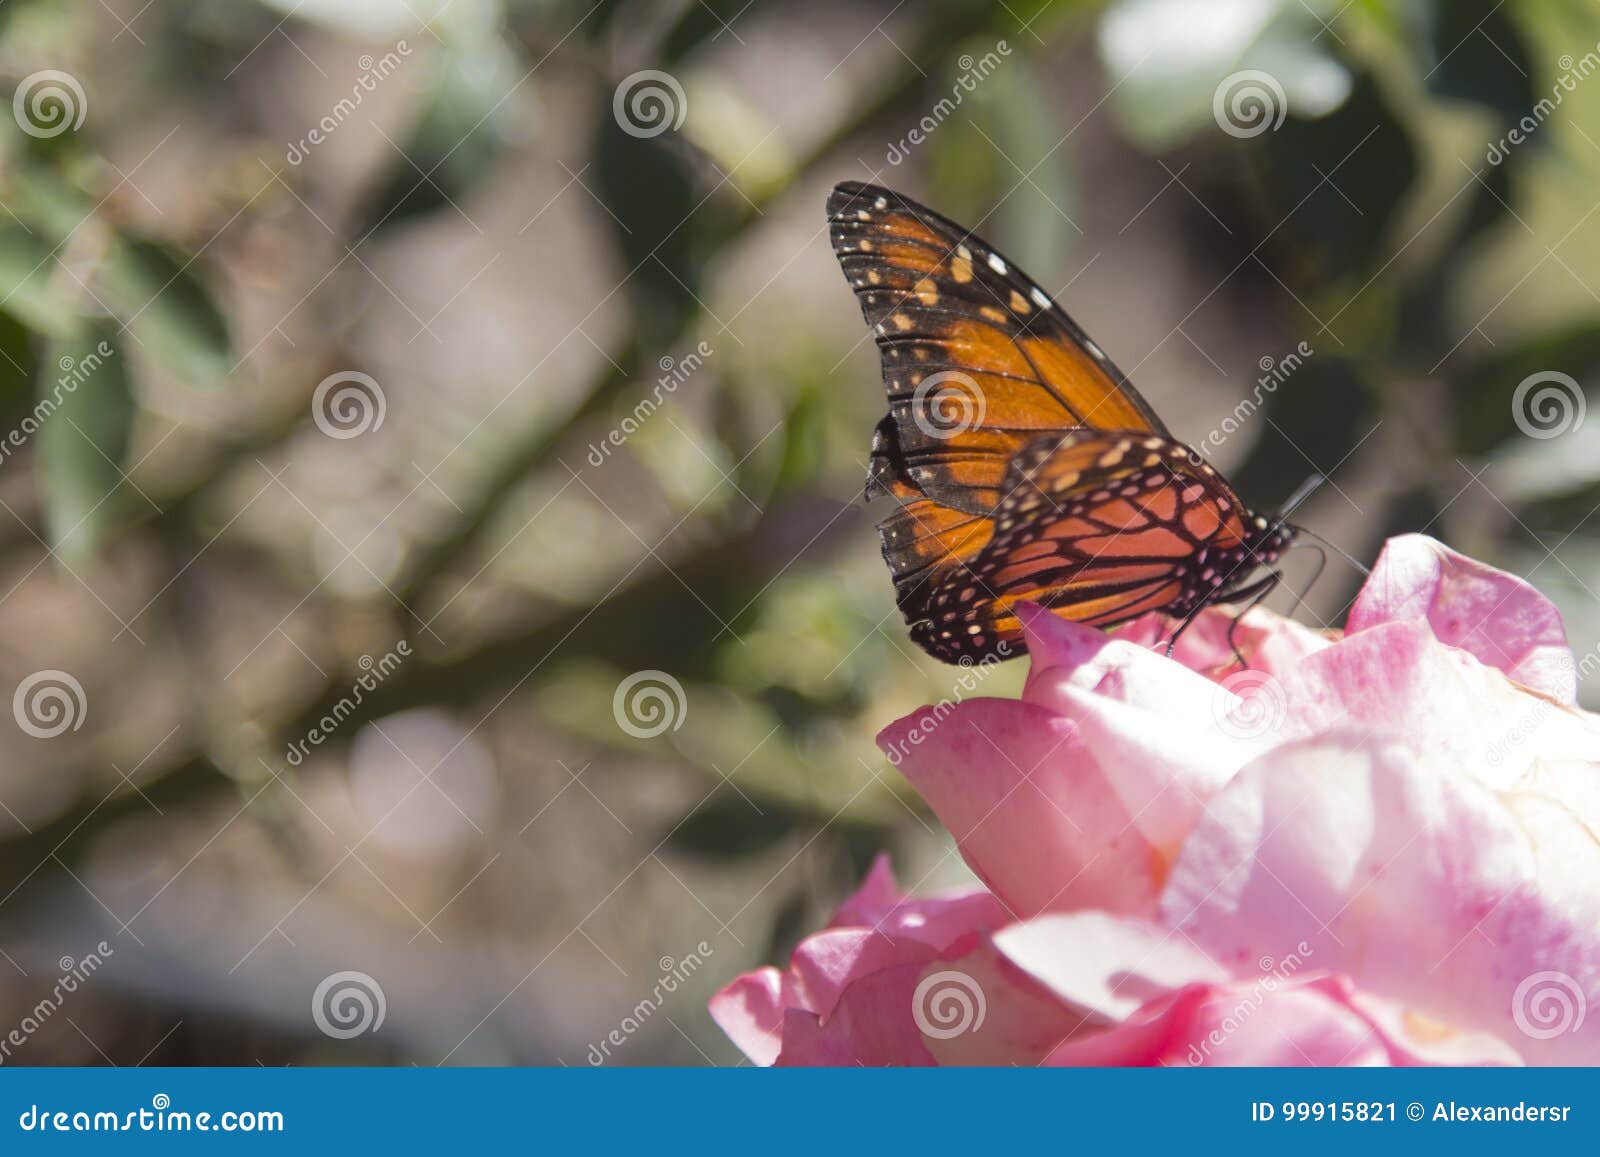 butterfly rosedal de palermo buenos aires argentina latin america south america nice